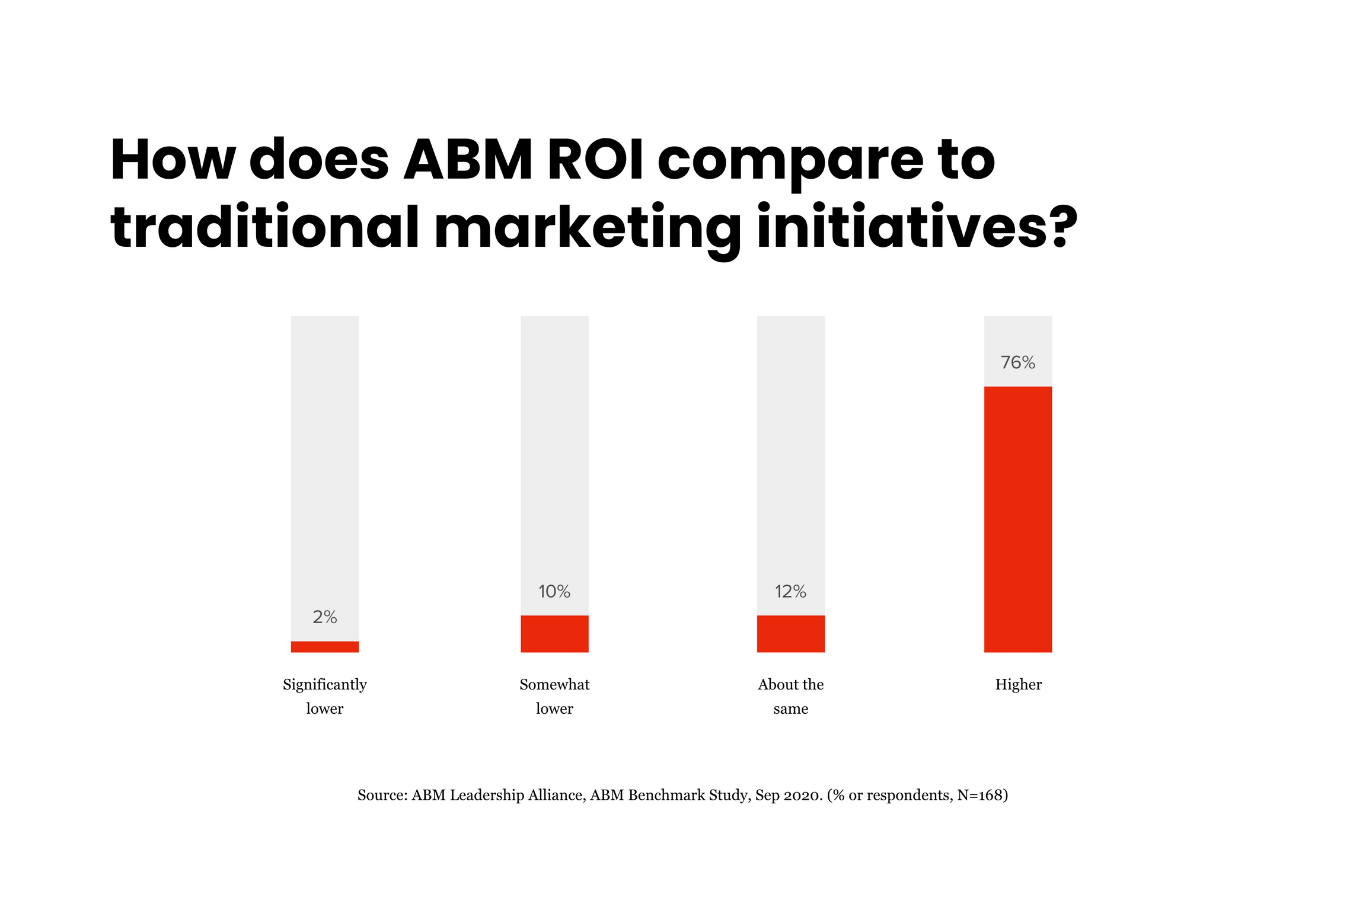 [ Insert Image With Survey Results from the ABM Leadership Alliance_How does ABM ROI compare to other activities ]